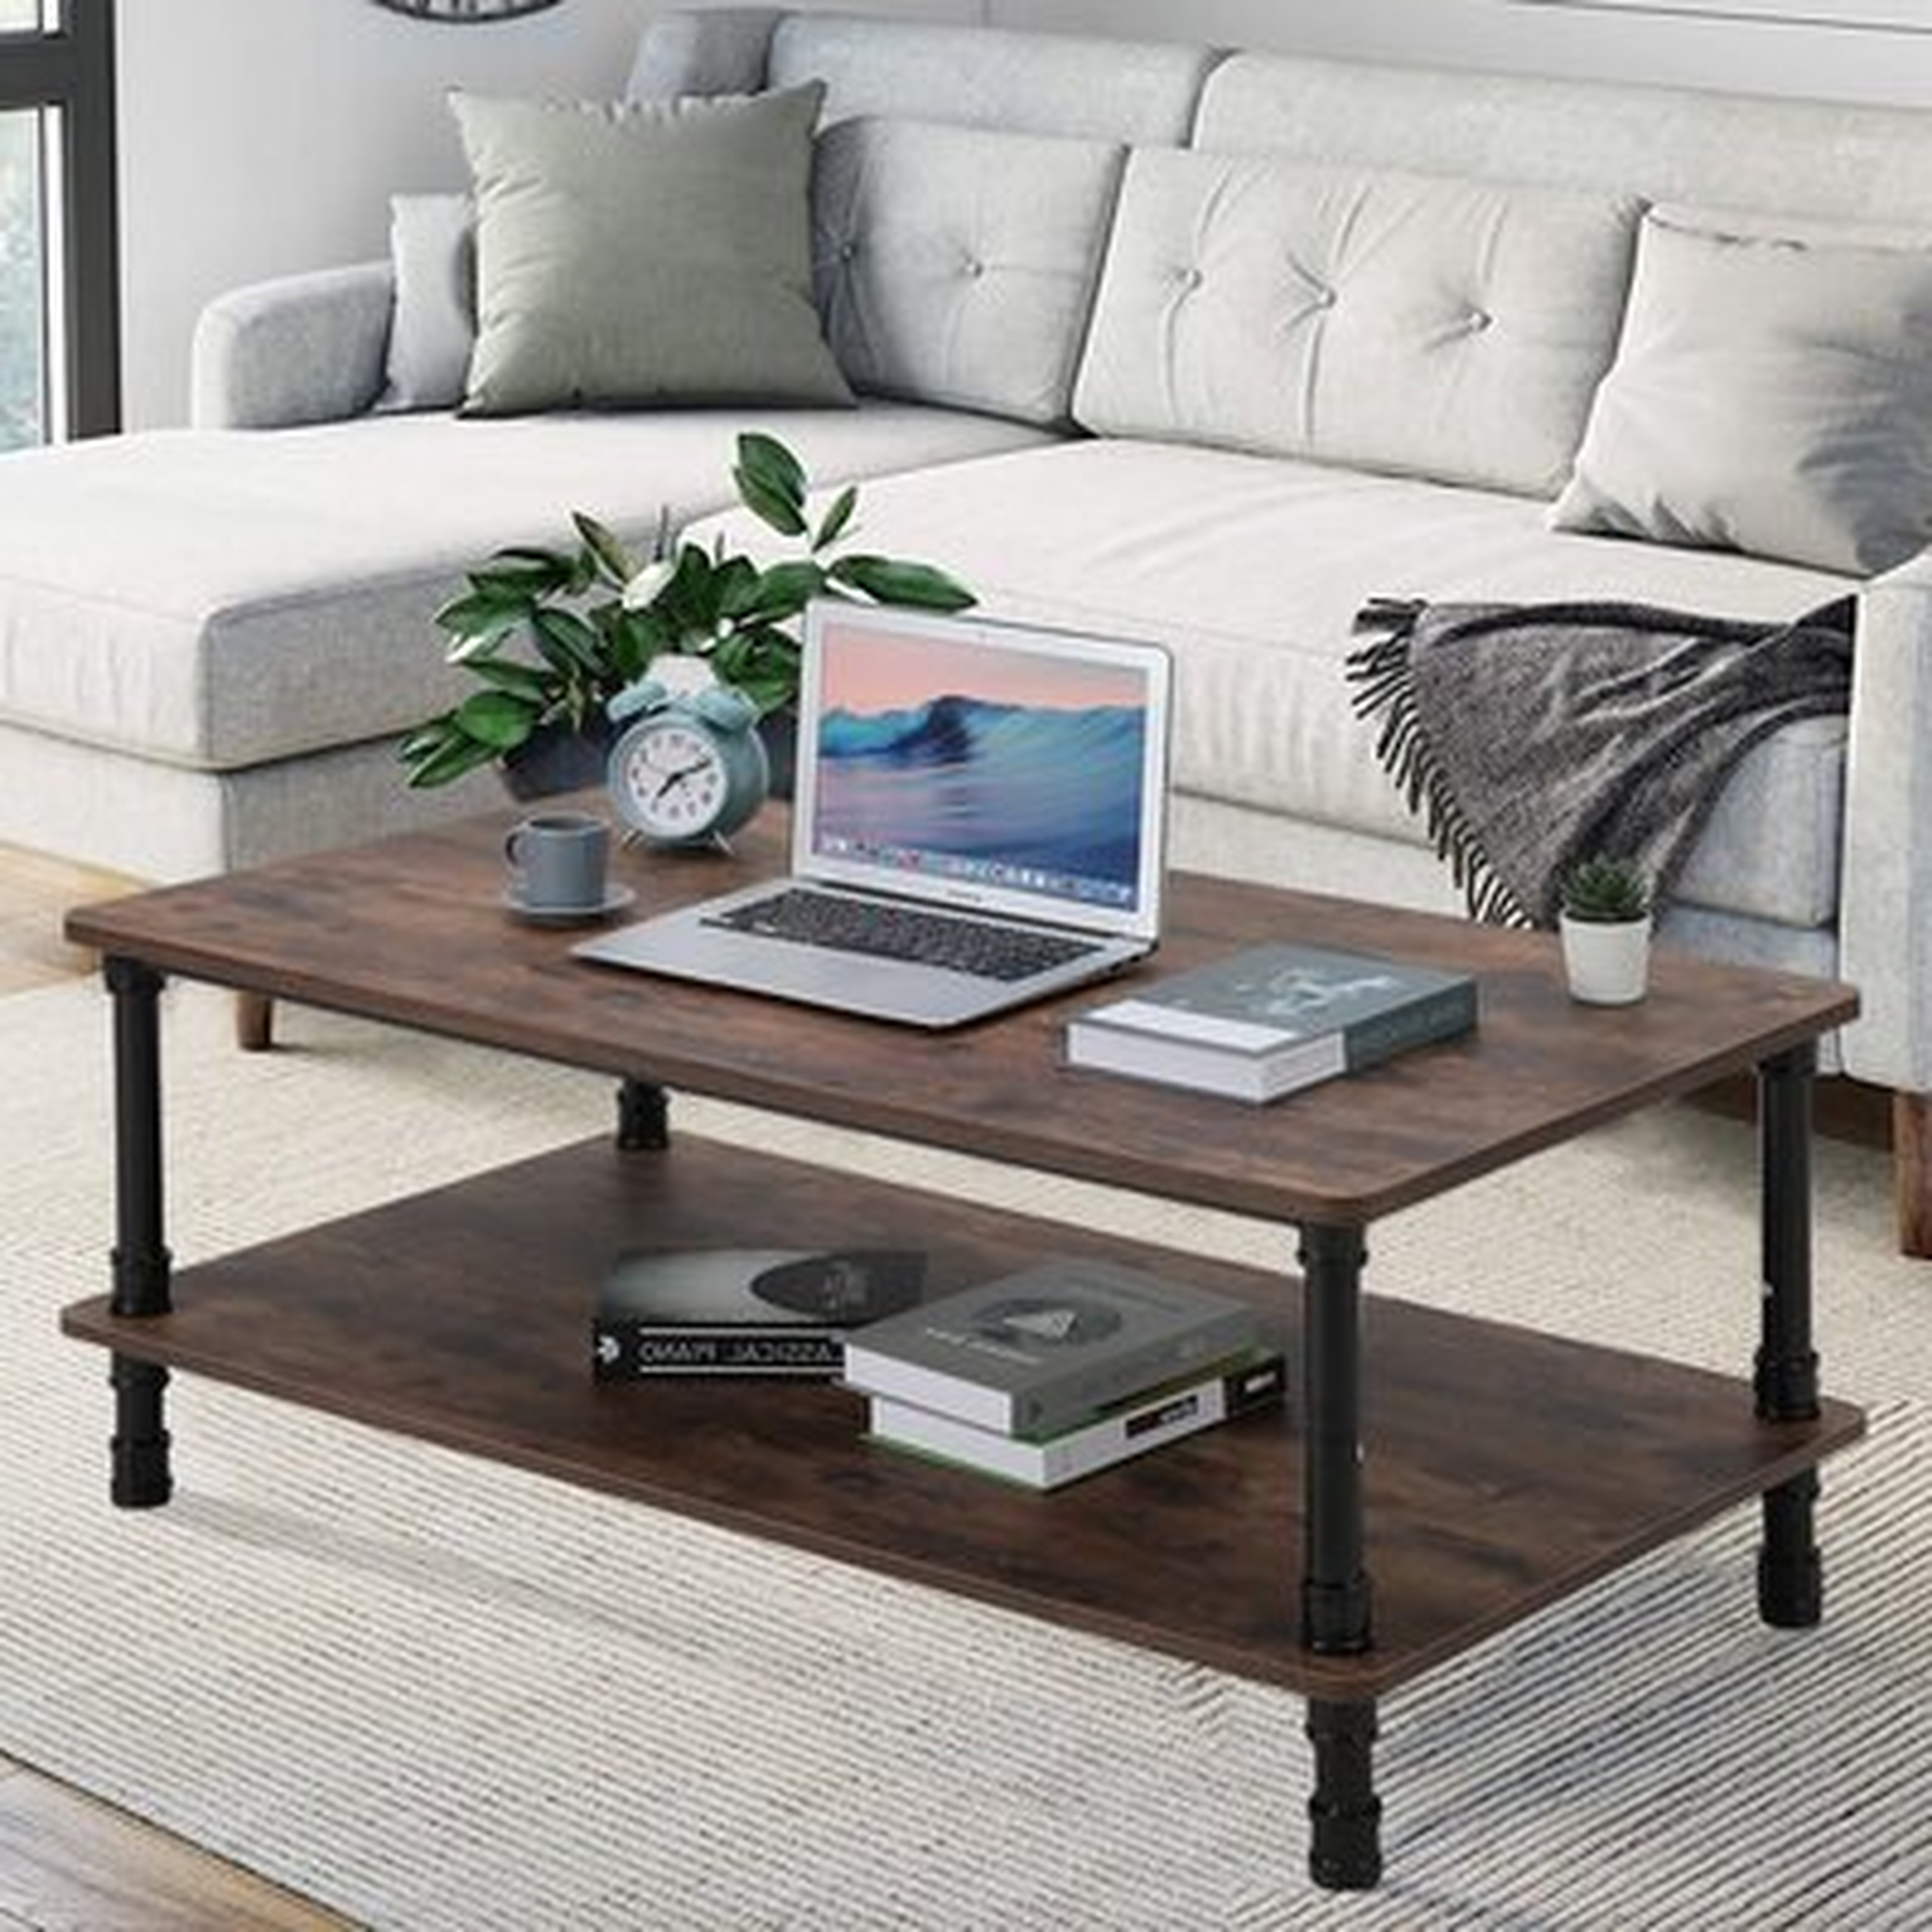 Rectangle Modern Industrial Coffee Table In Walnut Brown With Storage, 1 Shelf, For The Living Room, Family Room - Wayfair